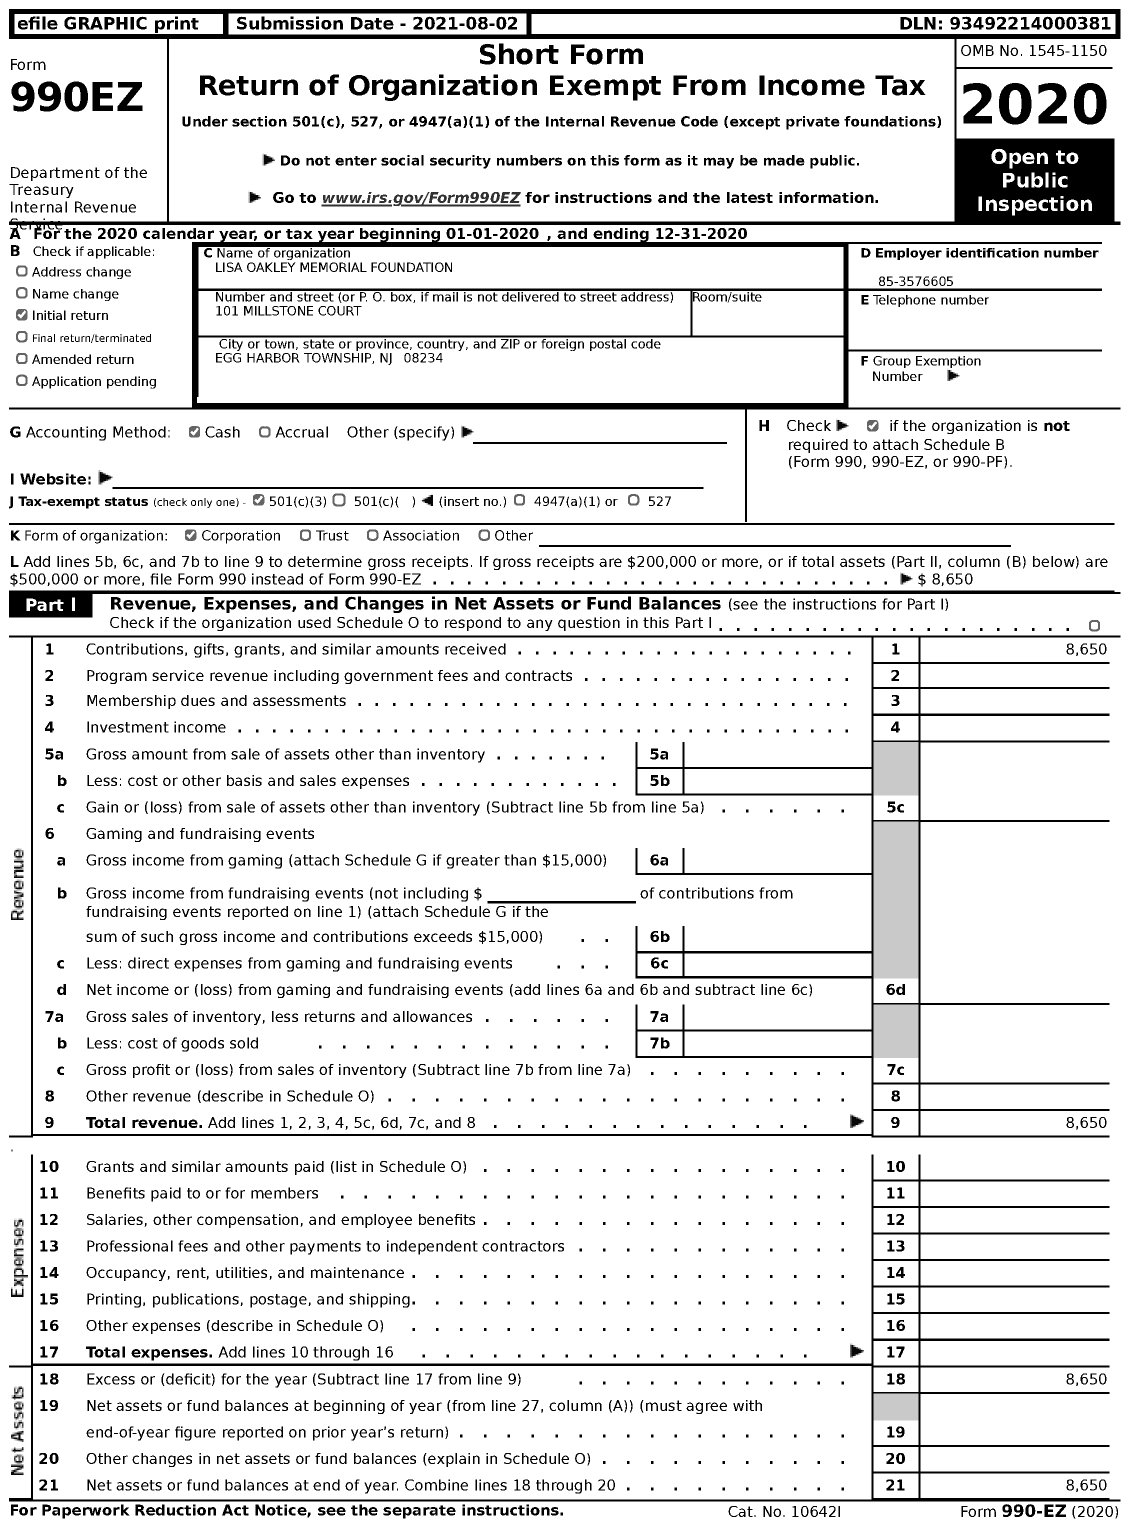 Image of first page of 2020 Form 990EZ for Lisa Oakley Memorial Foundation